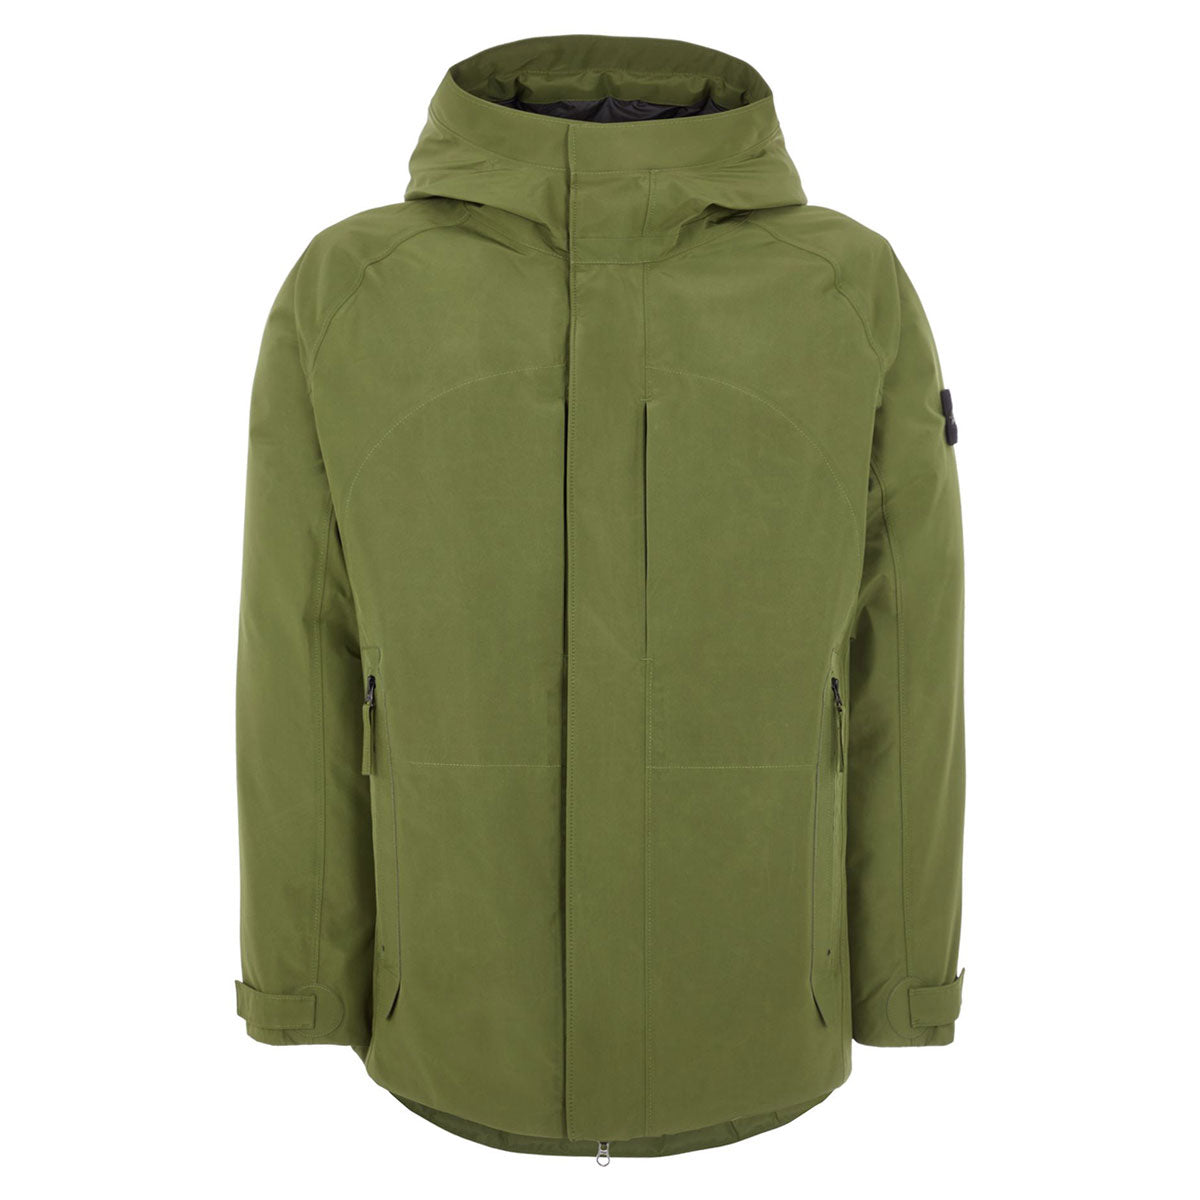 3L Gore-Tex in RecycleD Polyester Down